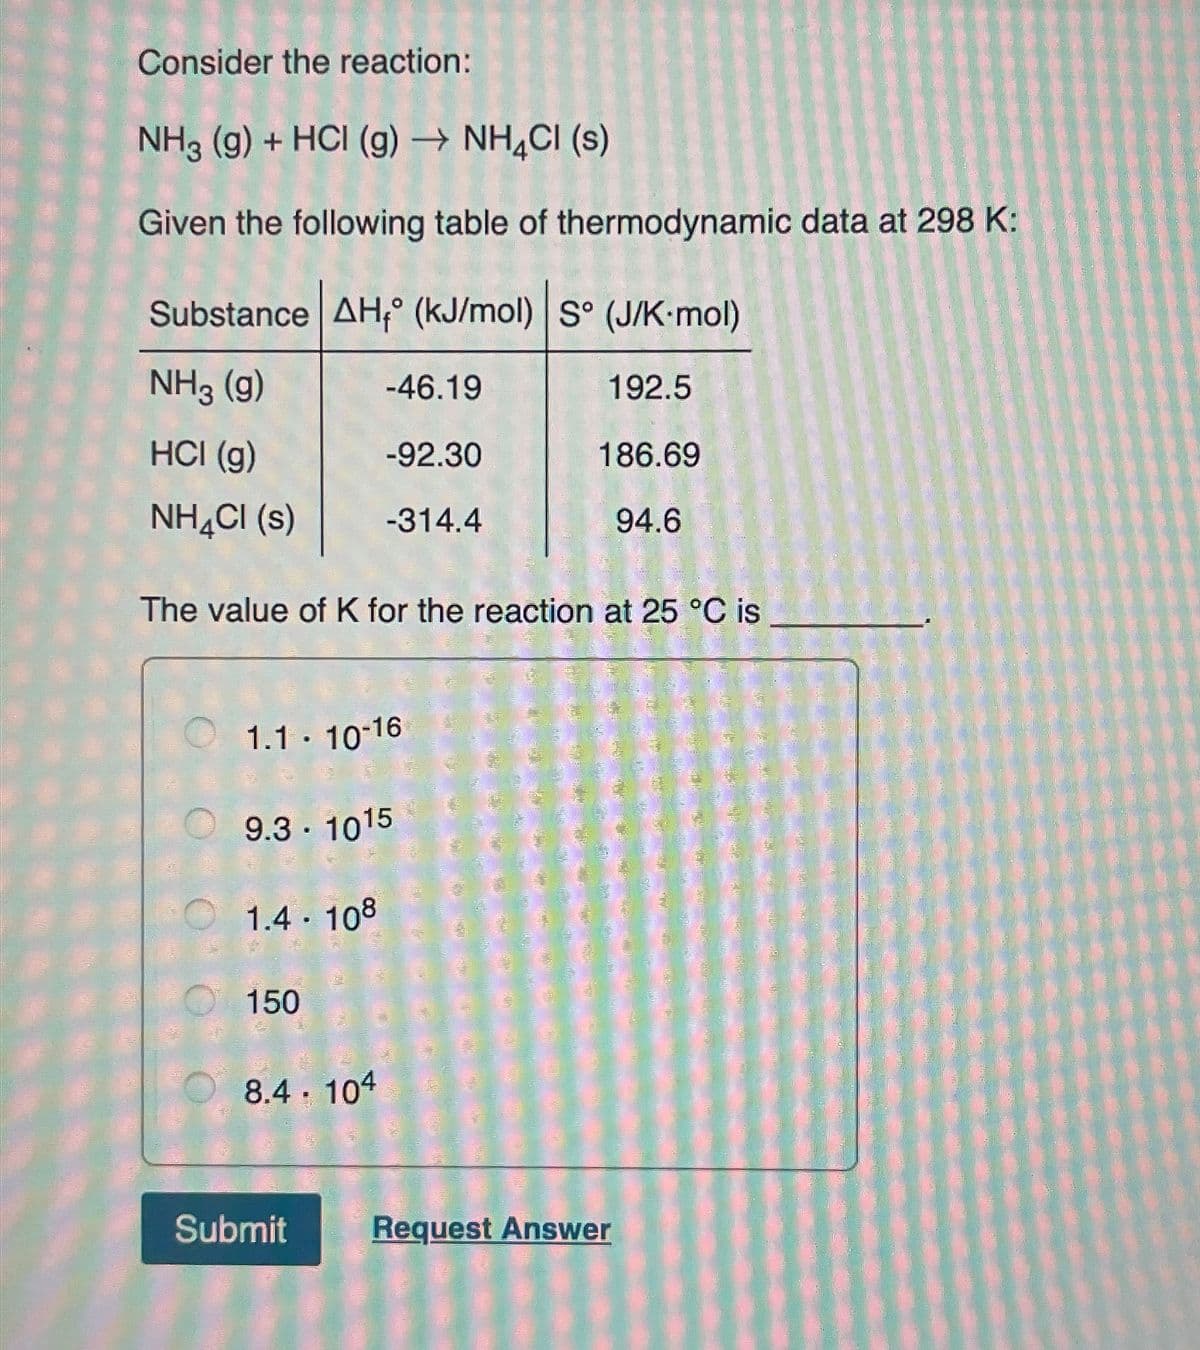 Consider the reaction:
NH3 (g) + HCI (g) → NH4Cl (s)
Given the following table of thermodynamic data at 298 K:
Substance AH° (kJ/mol) S° (J/K-mol)
NH3 (g)
-46.19
192.5
HCI (g)
-92.30
186.69
NH4Cl (s)
-314.4
94.6
The value of K for the reaction at 25 °C is
1.1-10-16
9.3 - 1015
1.4.108
150
8.4. 104
Submit
Request Answer